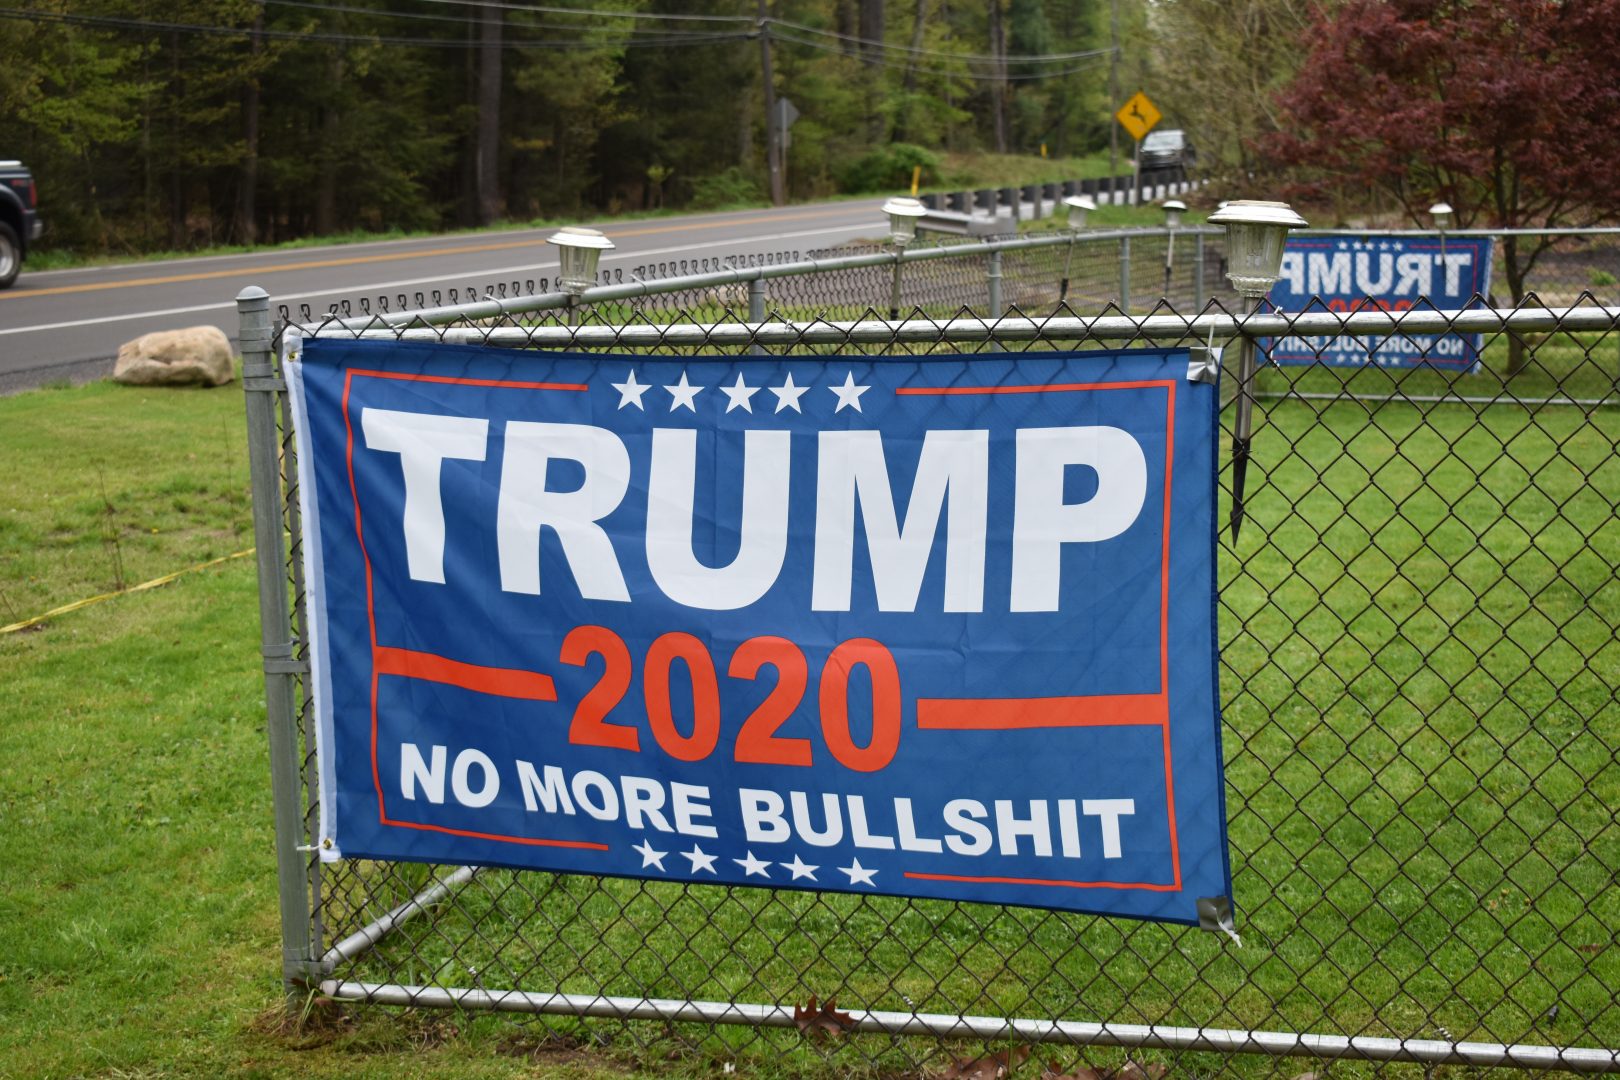 Daniel Klein hung up flags, seen on May 3, 2019, in support of Republican Donald Trump. Klein has two such flags outside his Wyoming County home.